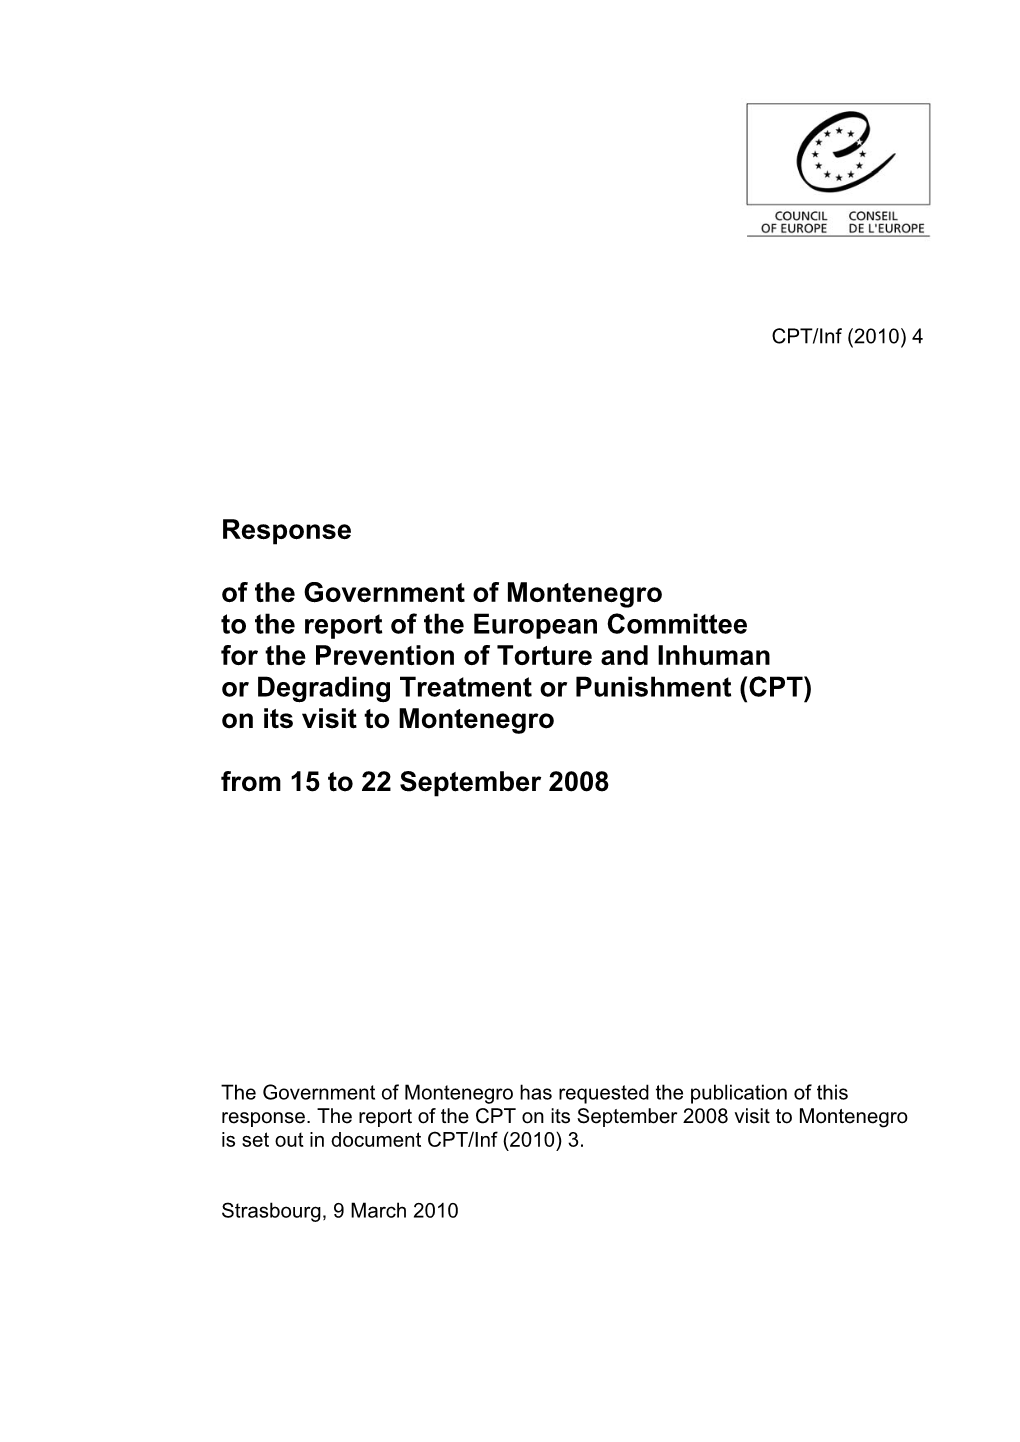 Response of the Government of Montenegro to the Report of the European Committee for the Prevention of Torture and Inhuman Or De